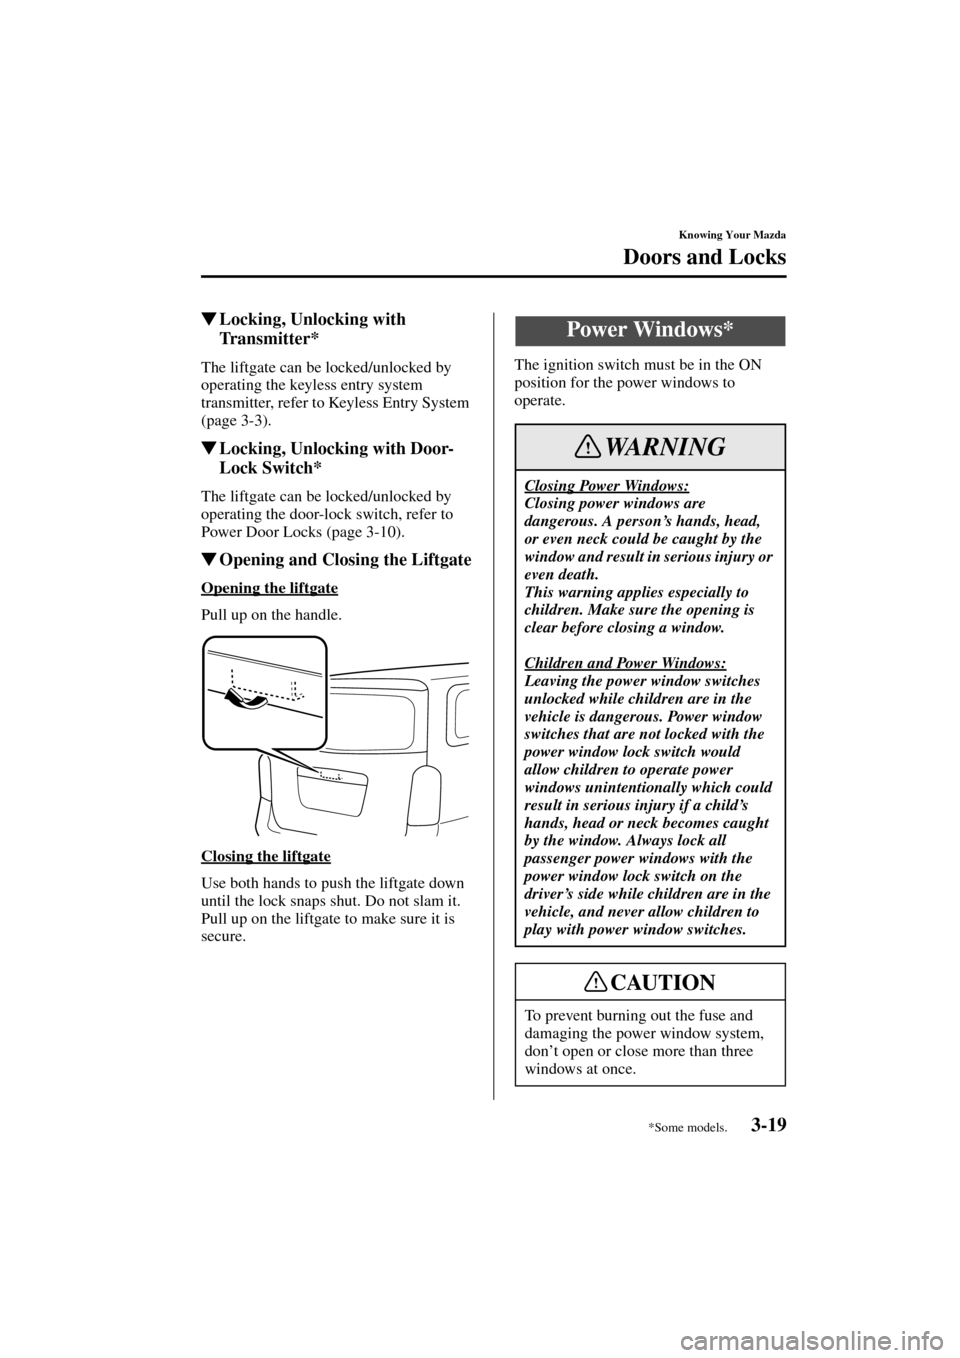 MAZDA MODEL MPV 2004  Owners Manual (in English) 3-19
Knowing Your Mazda
Doors and Locks
Form No. 8S06-EA-03H
Locking, Unlocking with 
Transmitter*
The liftgate can be locked/unlocked by 
operating the keyless entry system 
transmitter, refer to Ke